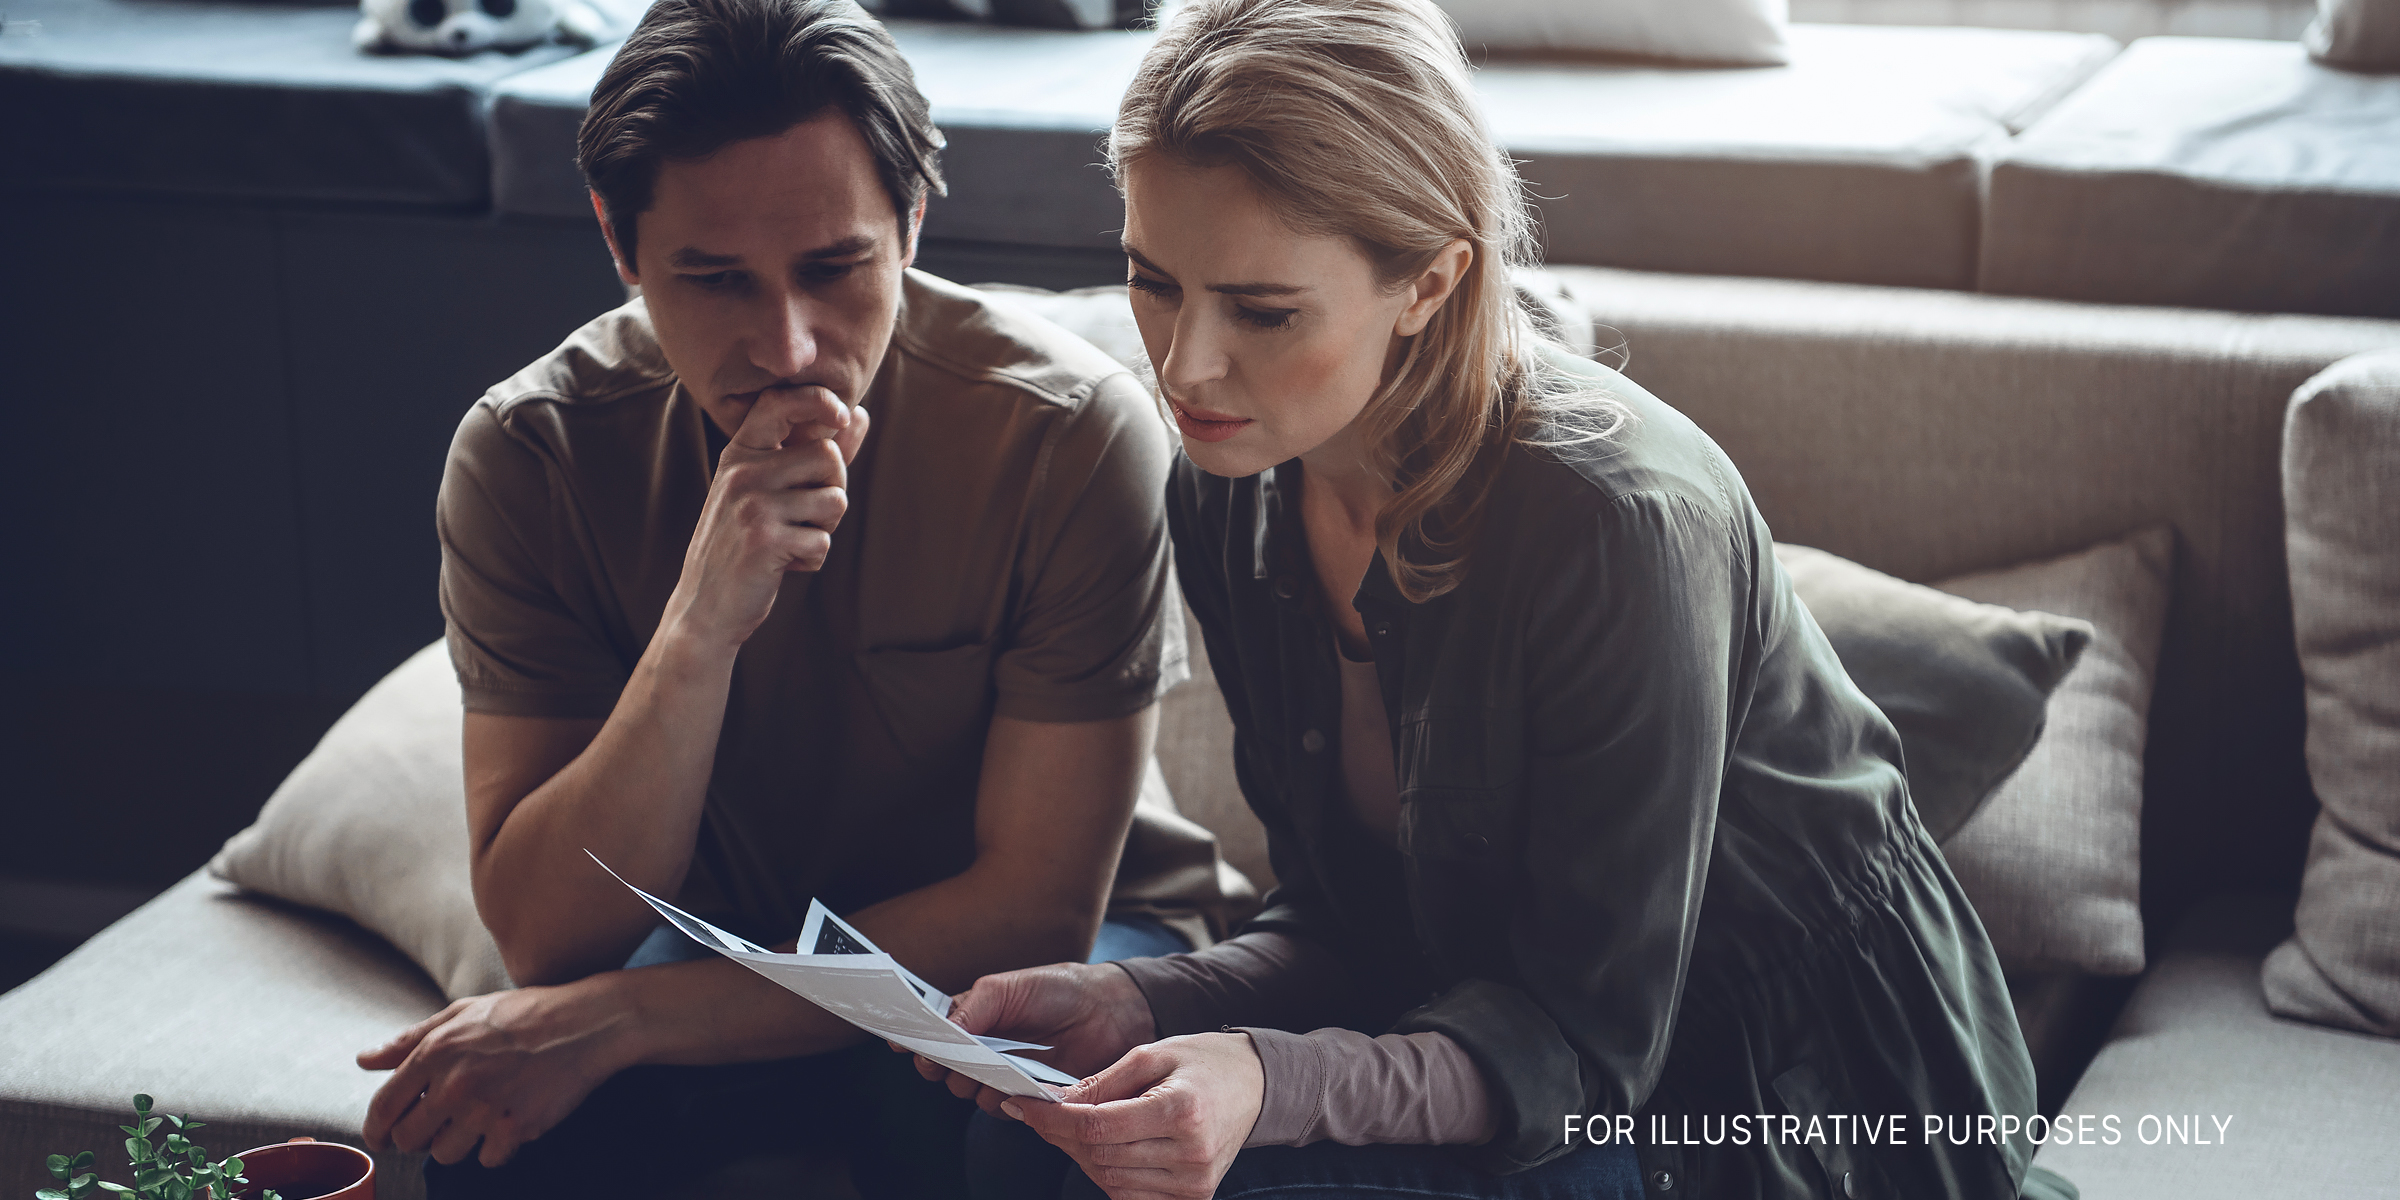 Depressed couple looking at a document | Source: Shutterstock